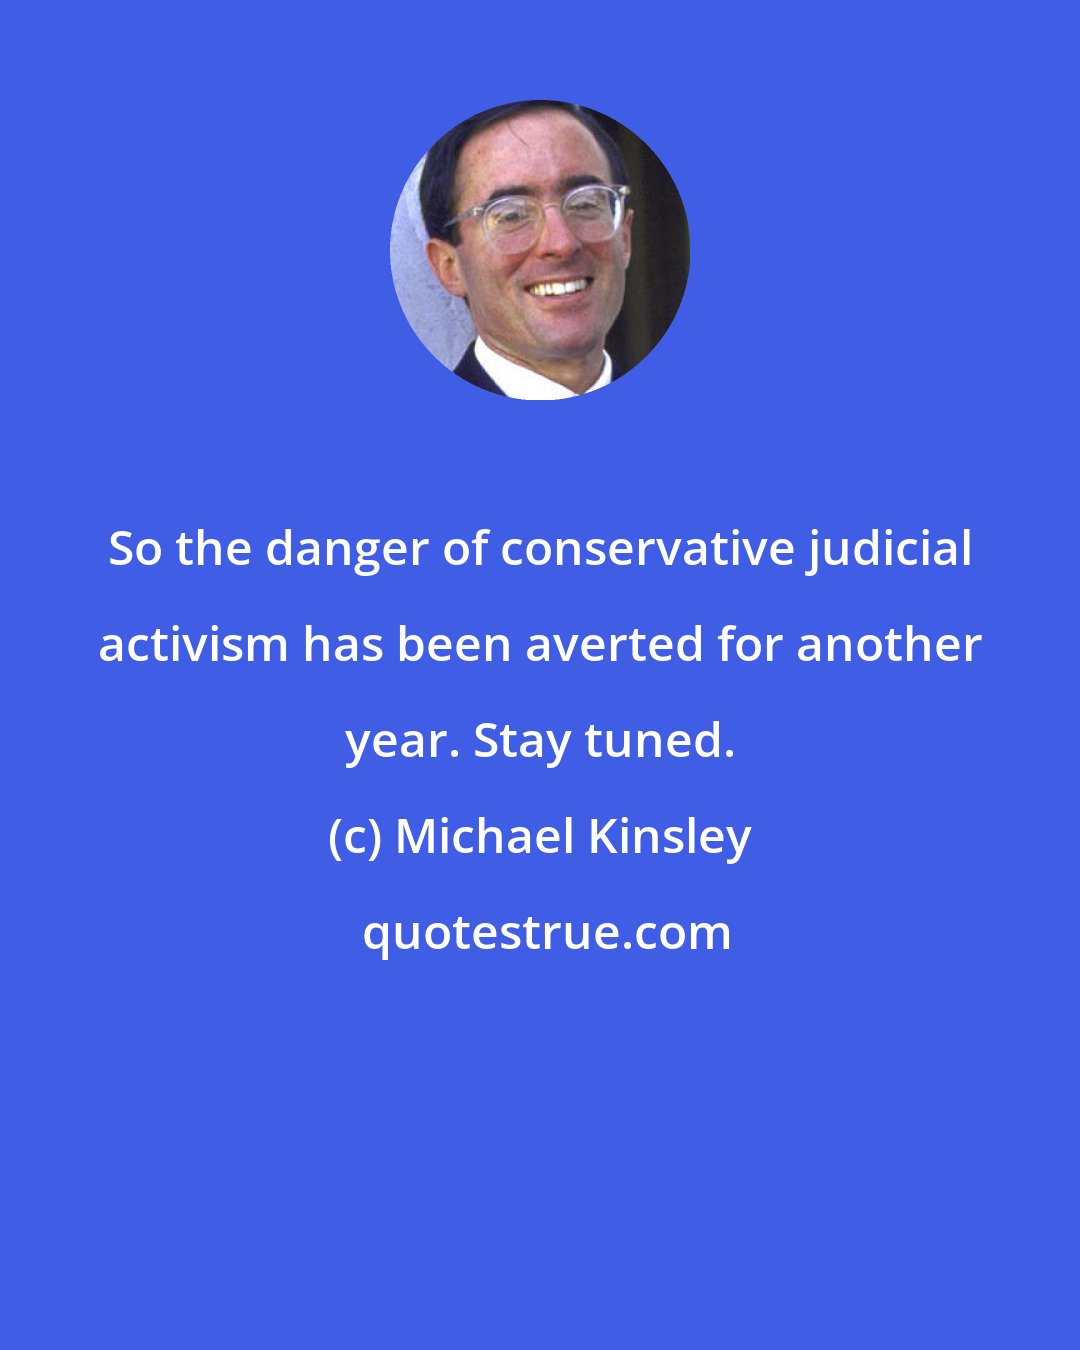 Michael Kinsley: So the danger of conservative judicial activism has been averted for another year. Stay tuned.